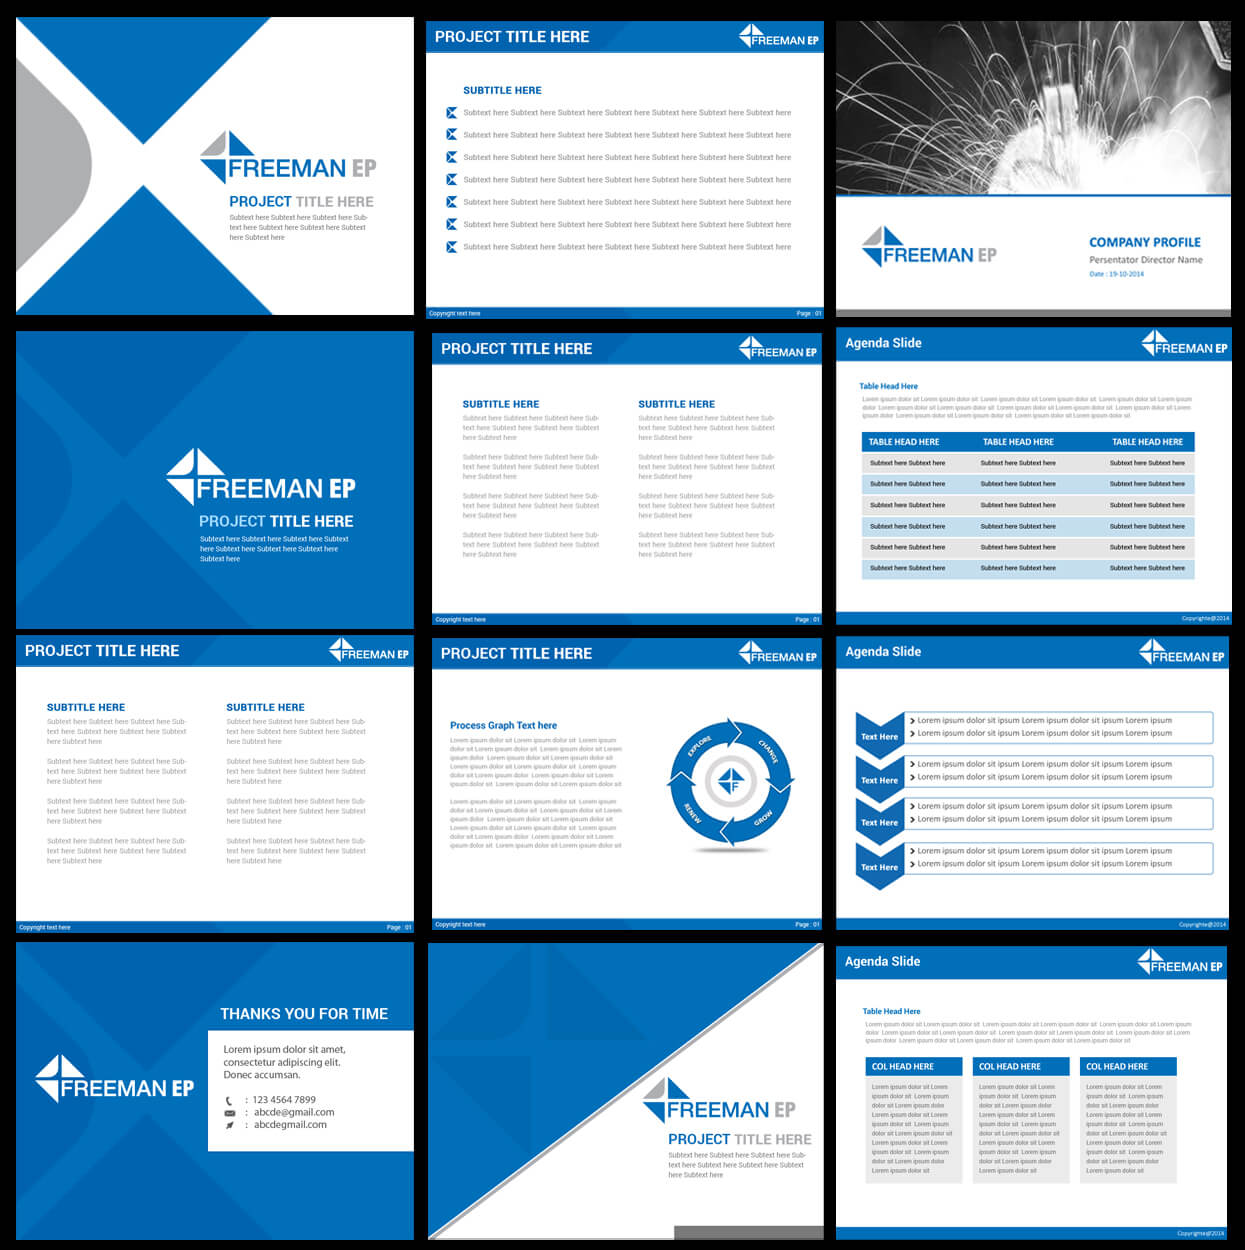 Powerpoint Presentation Design Templates Download Are Stored For Where Are Powerpoint Templates Stored